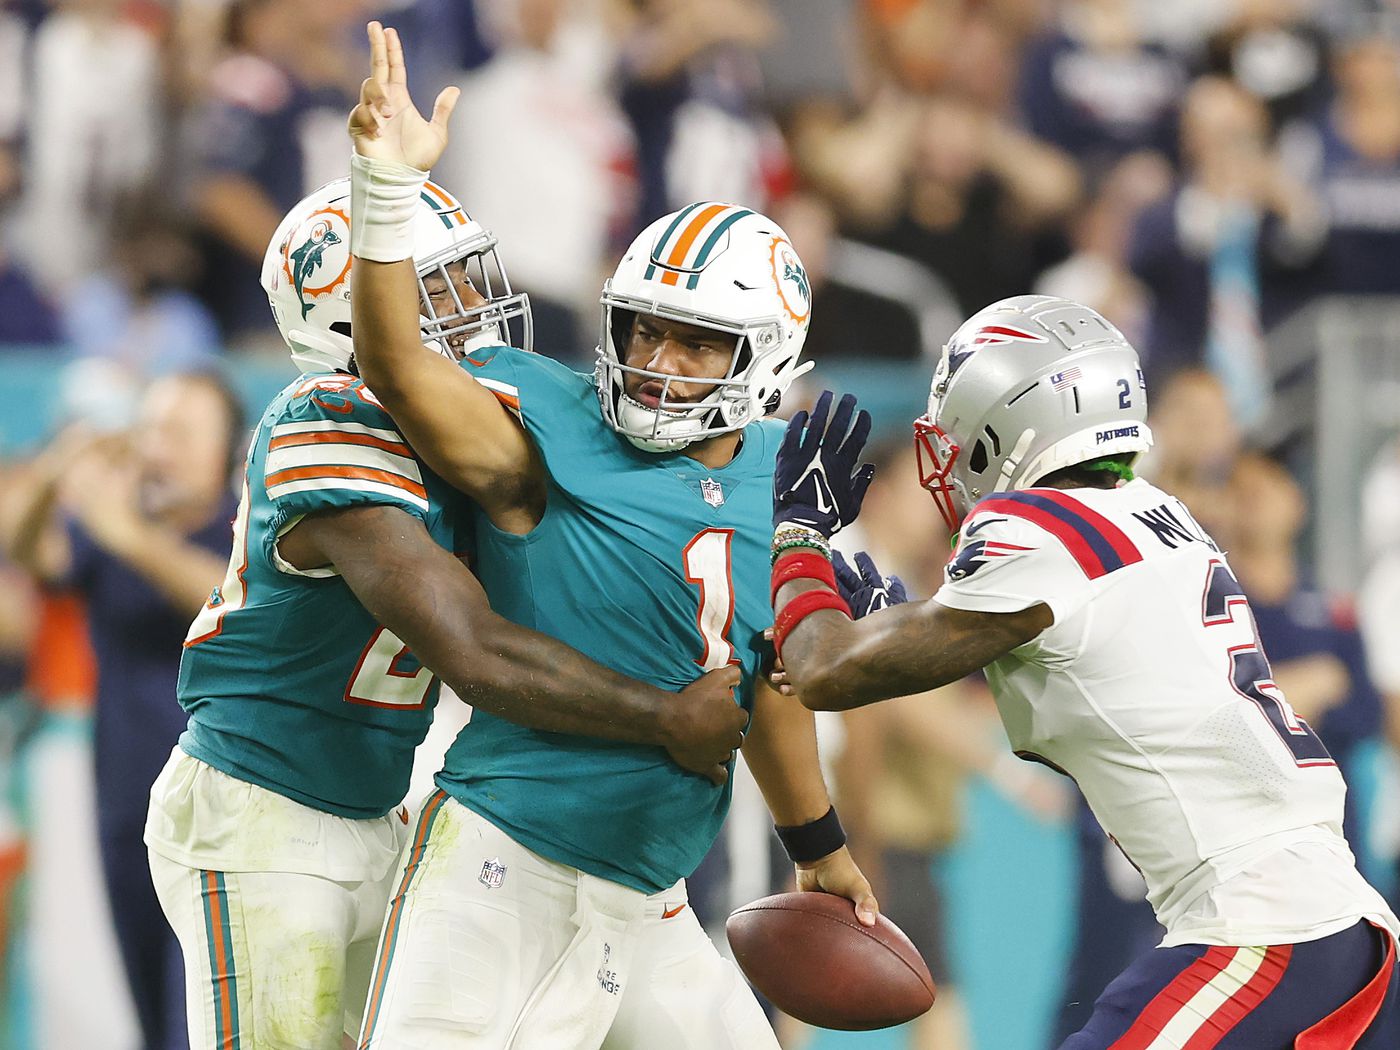 Miami Dolphins 2022 Schedule Dolphins 2022 Schedule: Opponents Set For Next Year - The Phinsider